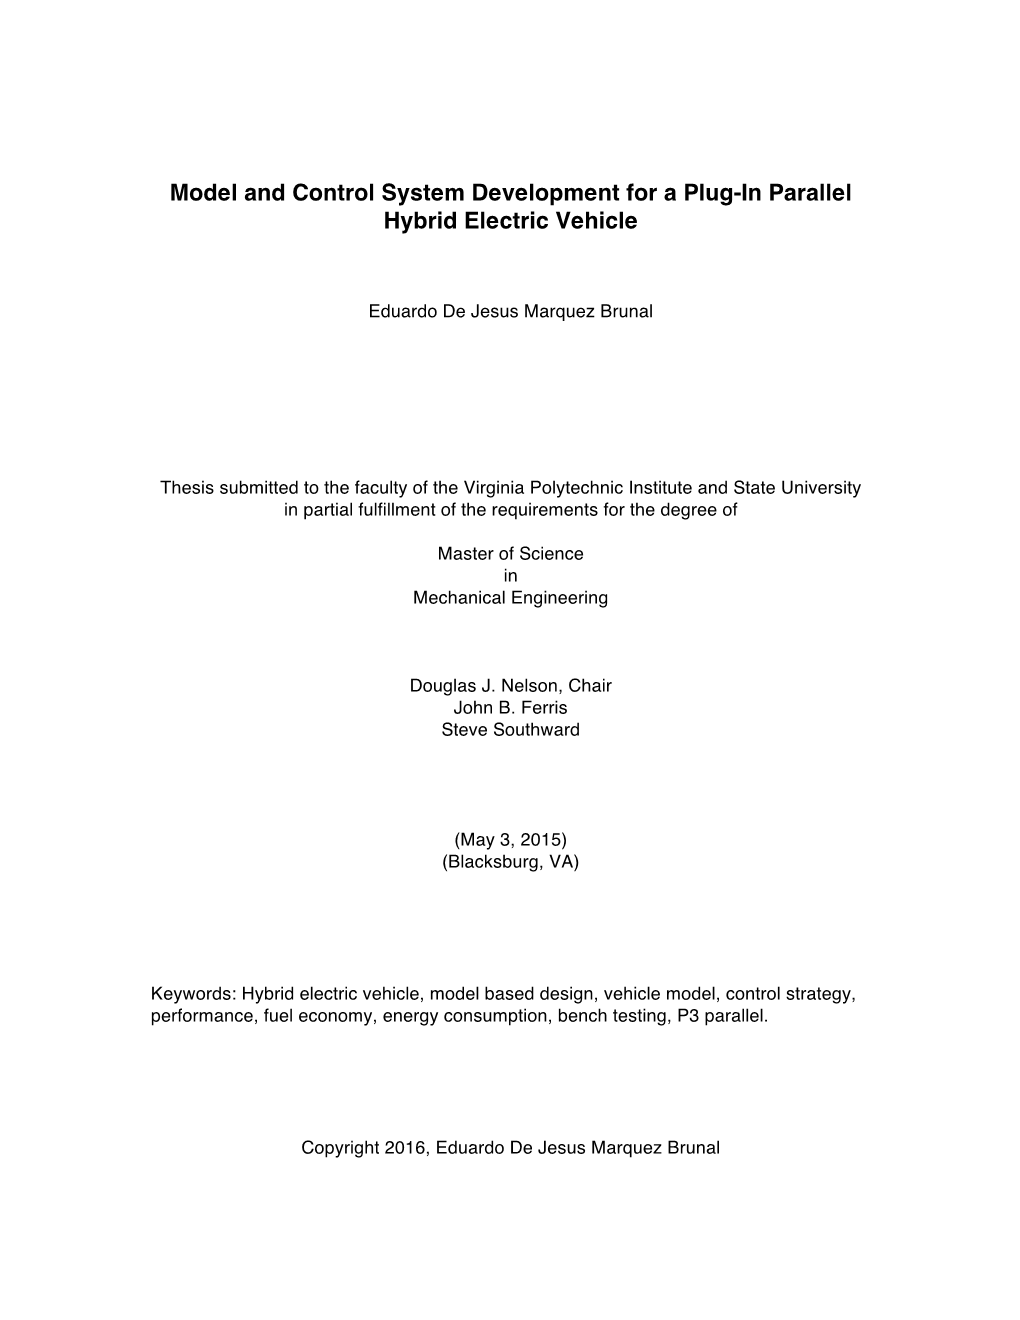 Model and Control System Development for a Plug-In Parallel Hybrid Electric Vehicle